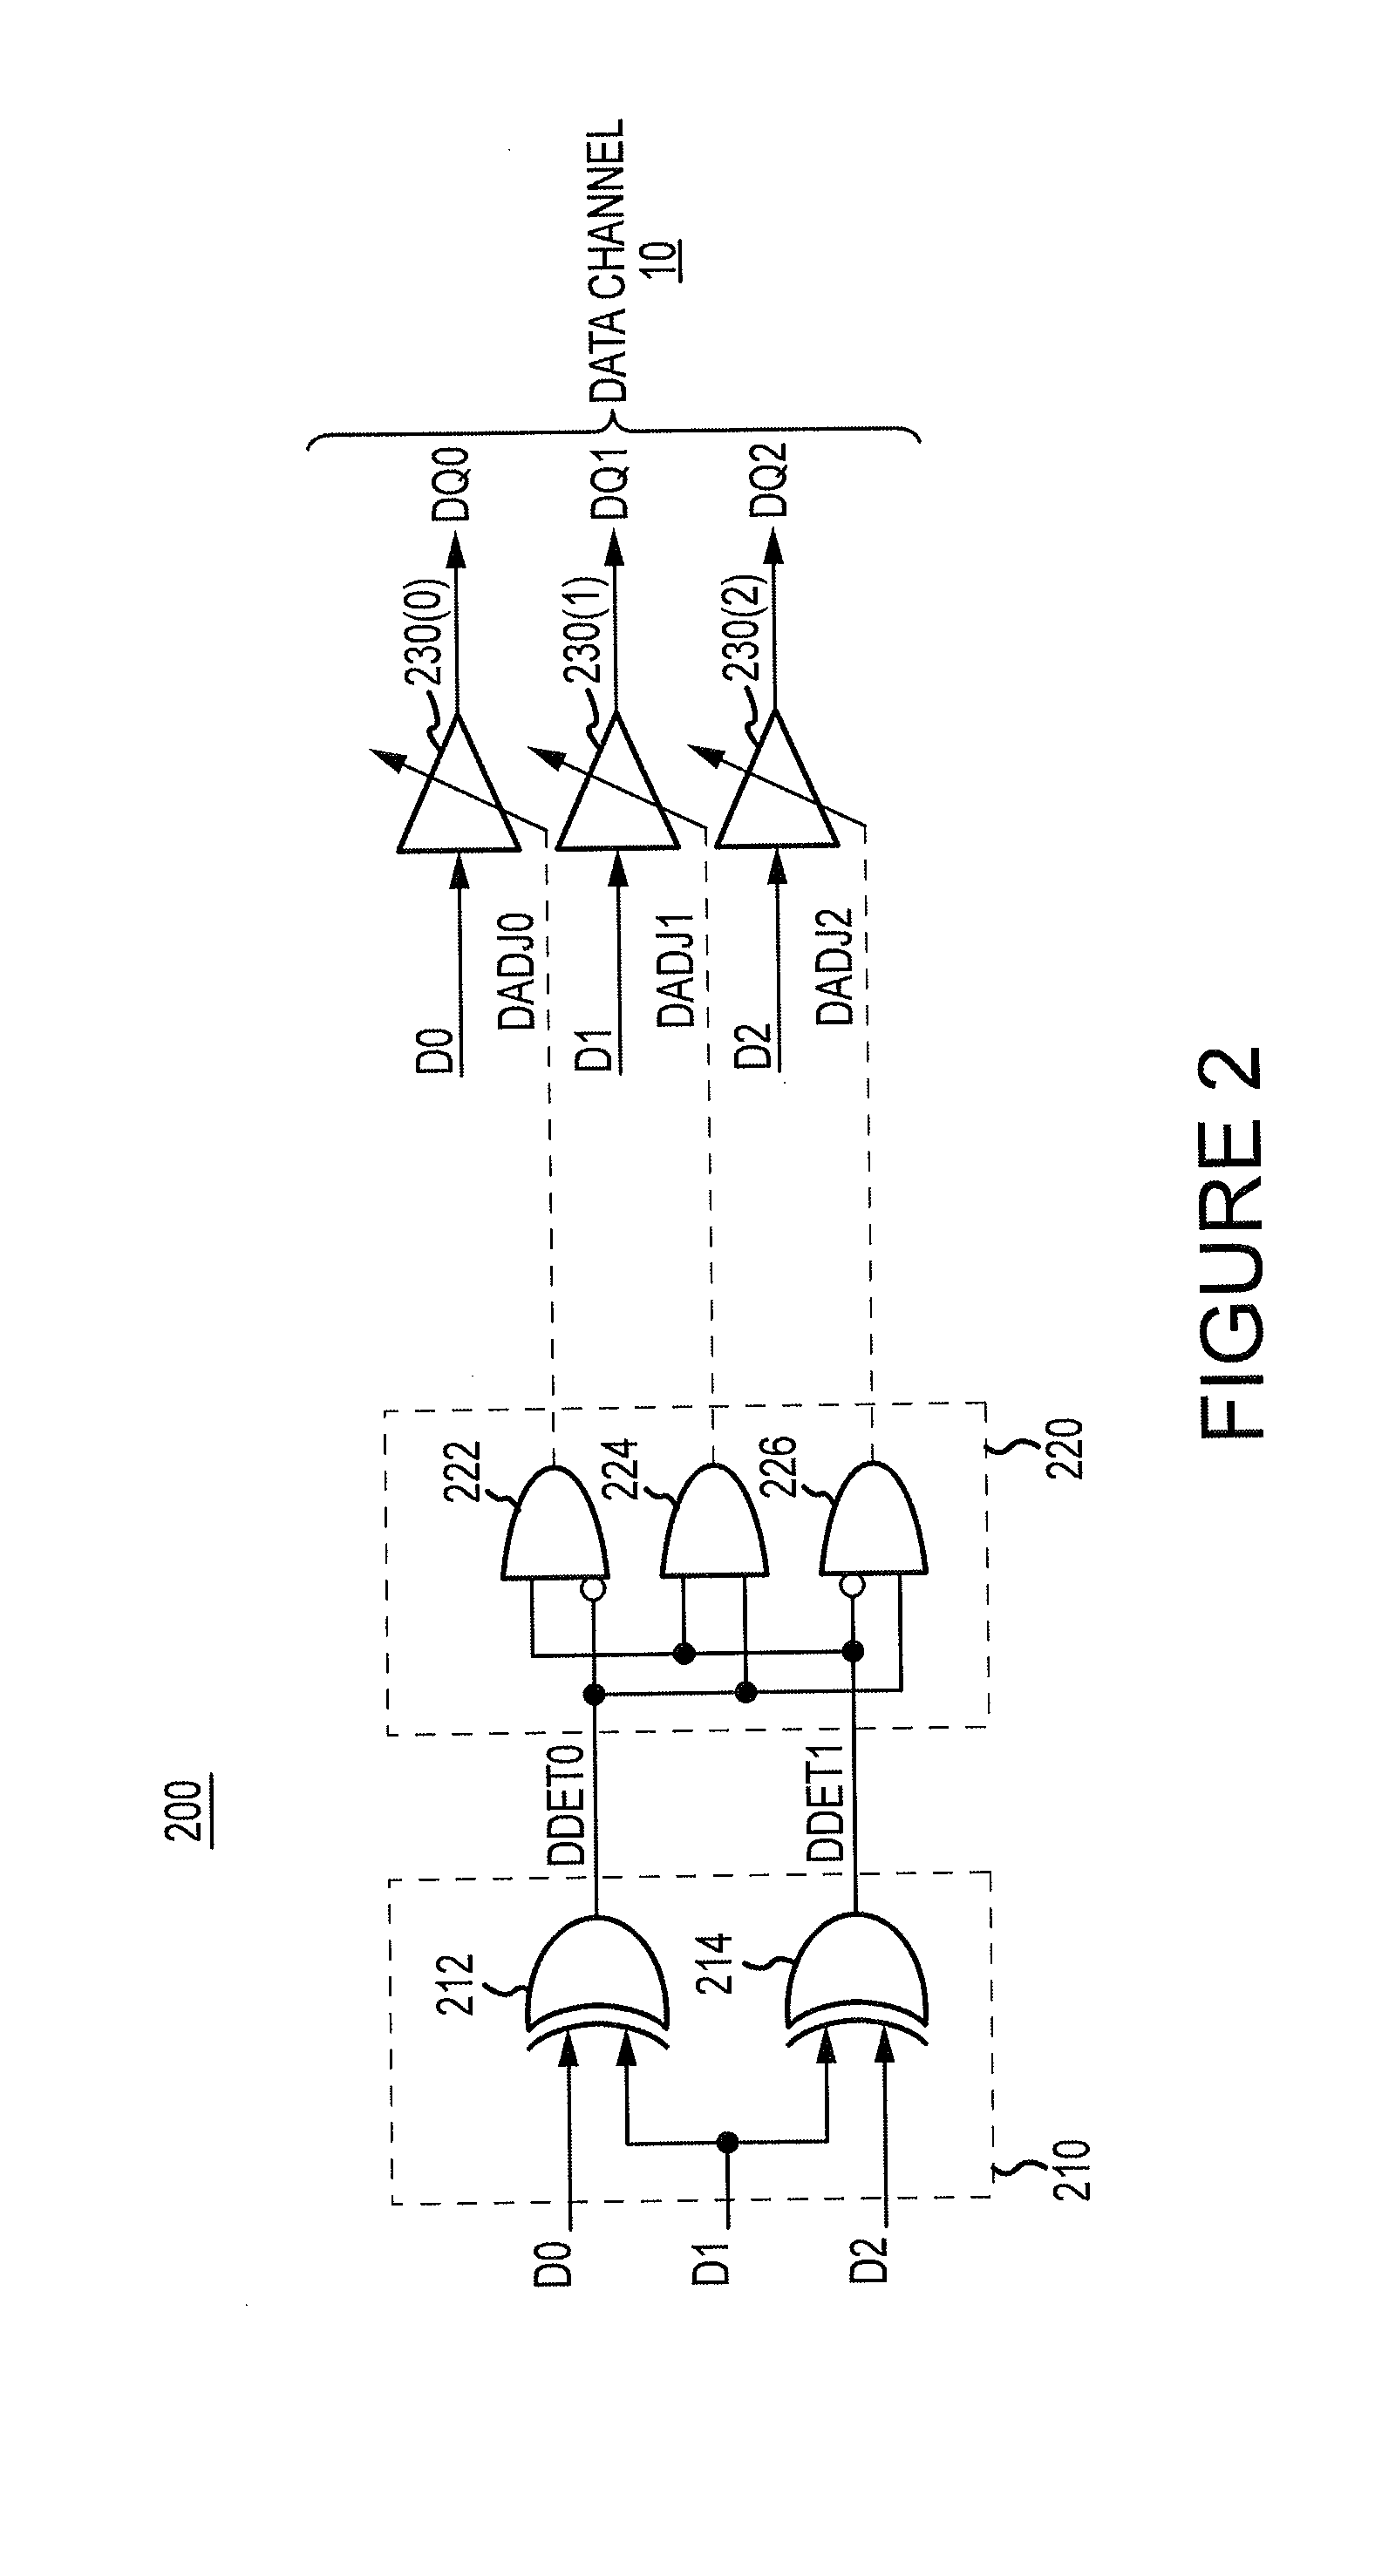 Adjustable data drivers and methods for driving data signals